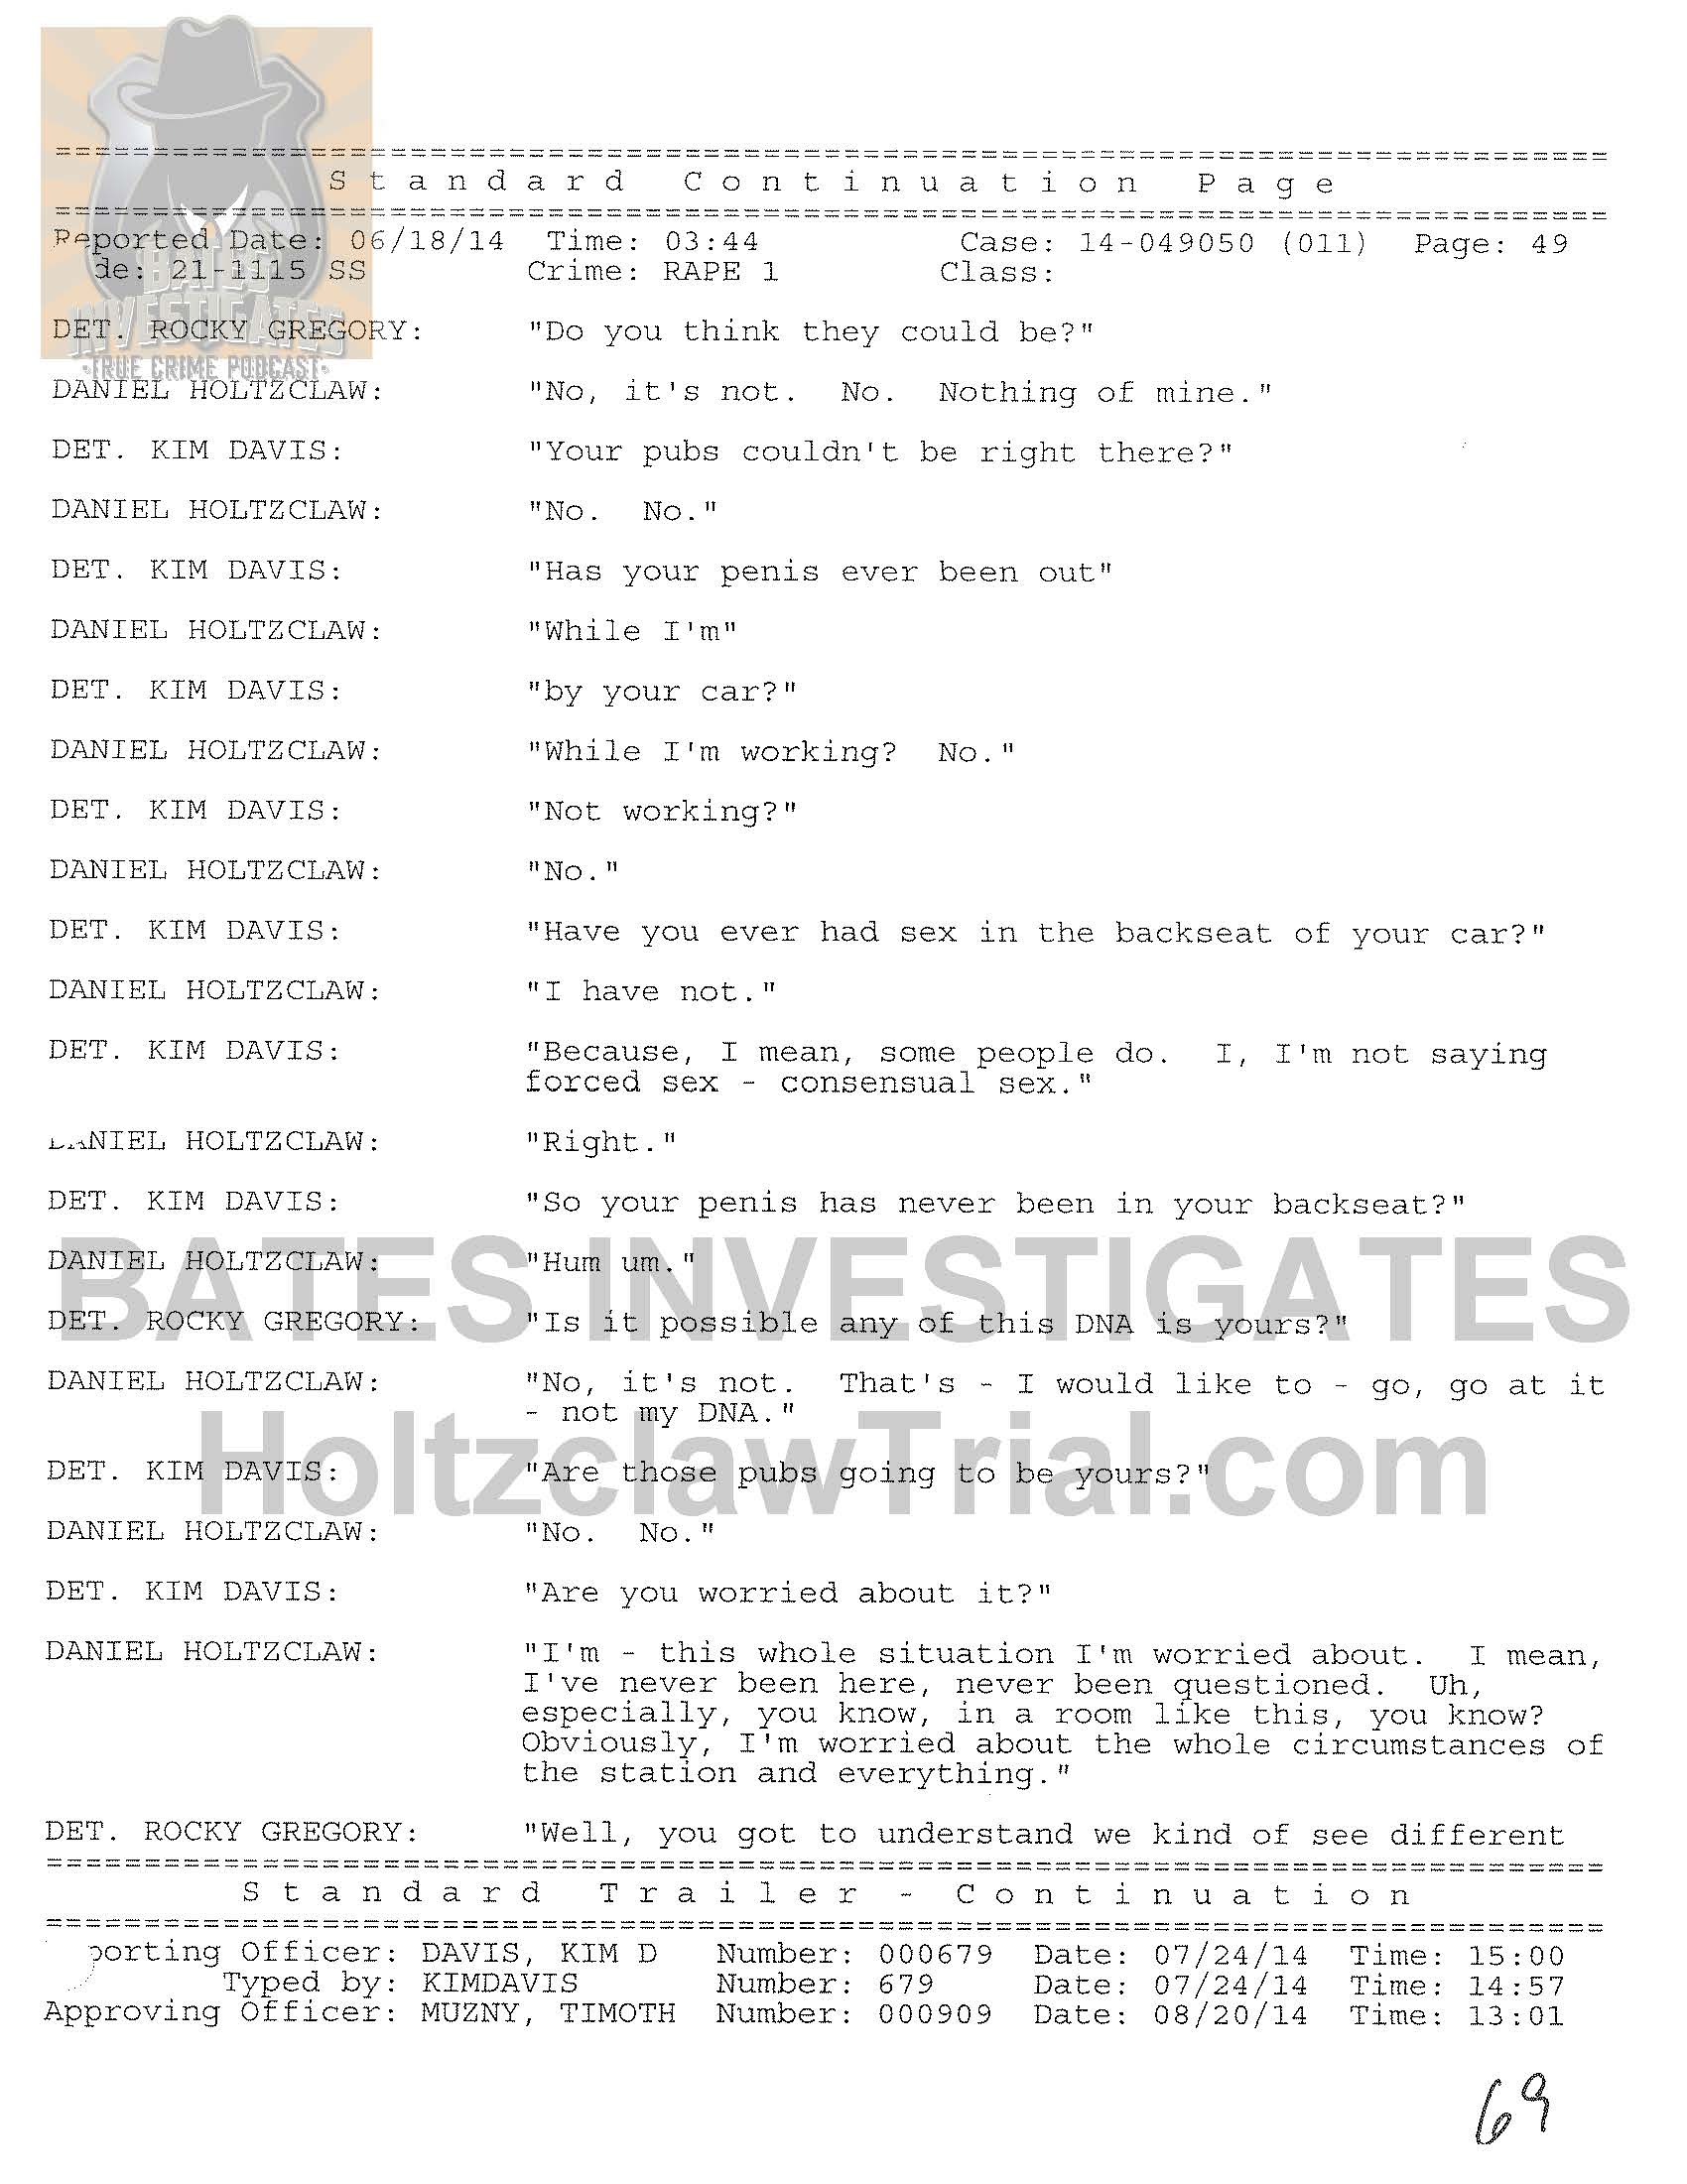 Holtzclaw Interrogation Transcript - Ep02 Redacted_Page_49.jpg